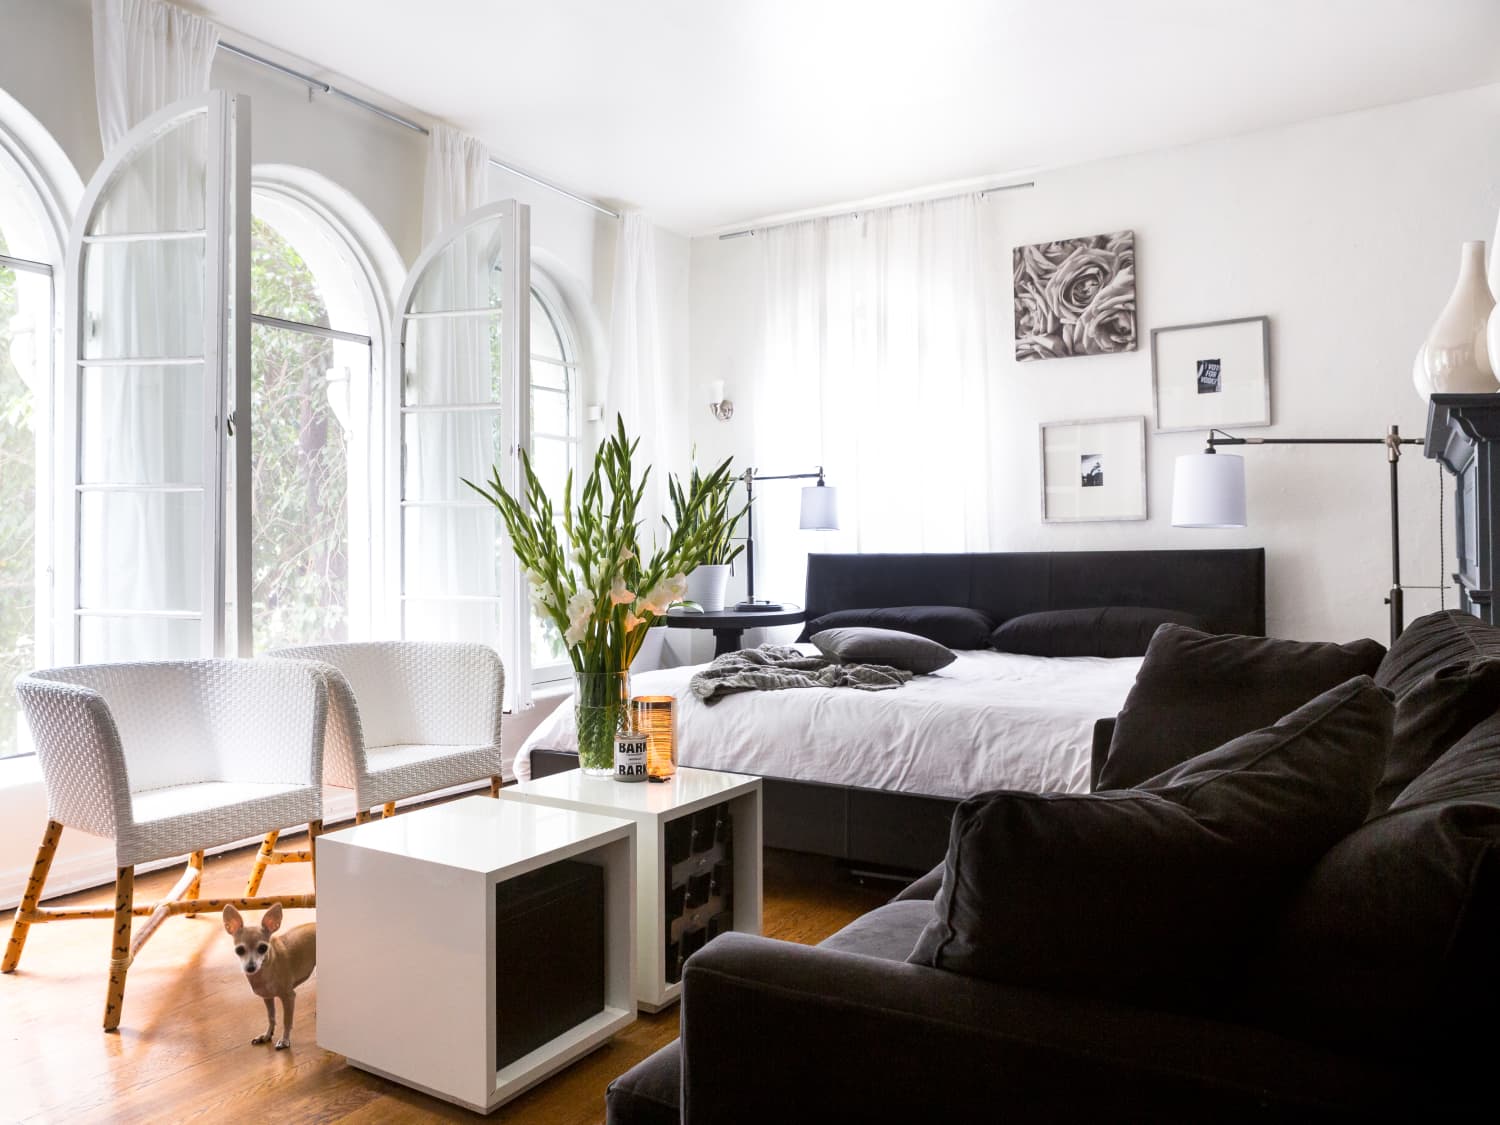 46 Small Apartment Products People Actually Use